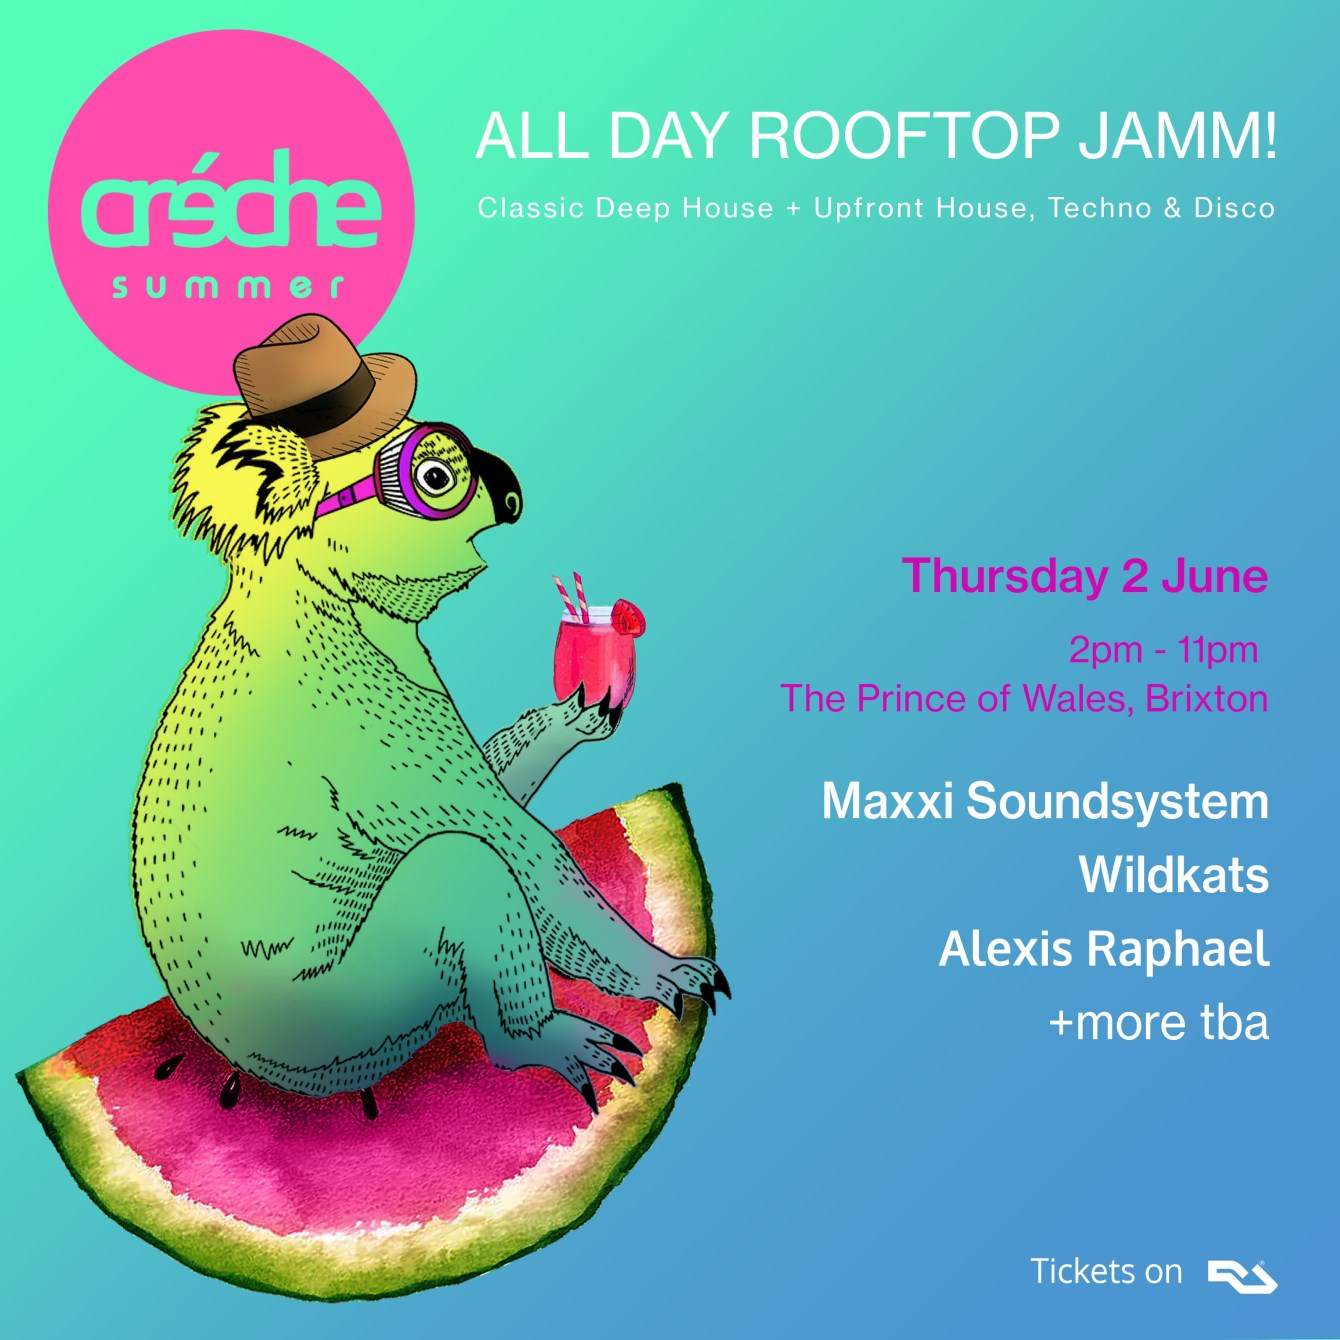 Creche Mid Summer All Day Rooftop Jamm - Página frontal